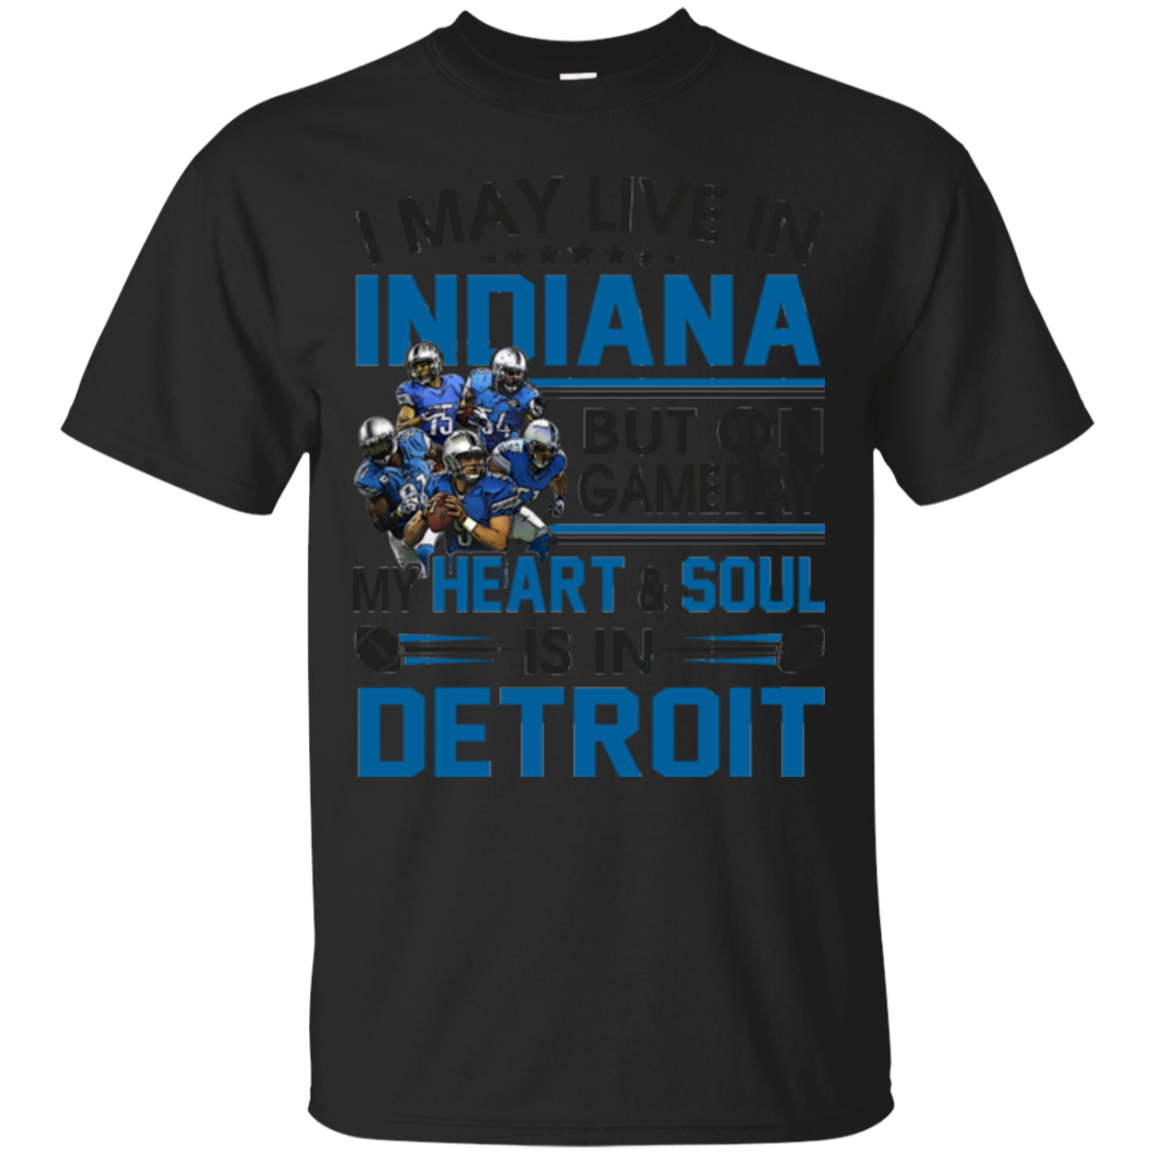 Detroit Lions Shirts May Live In Indiana But Heart & Soul In Detroit ...